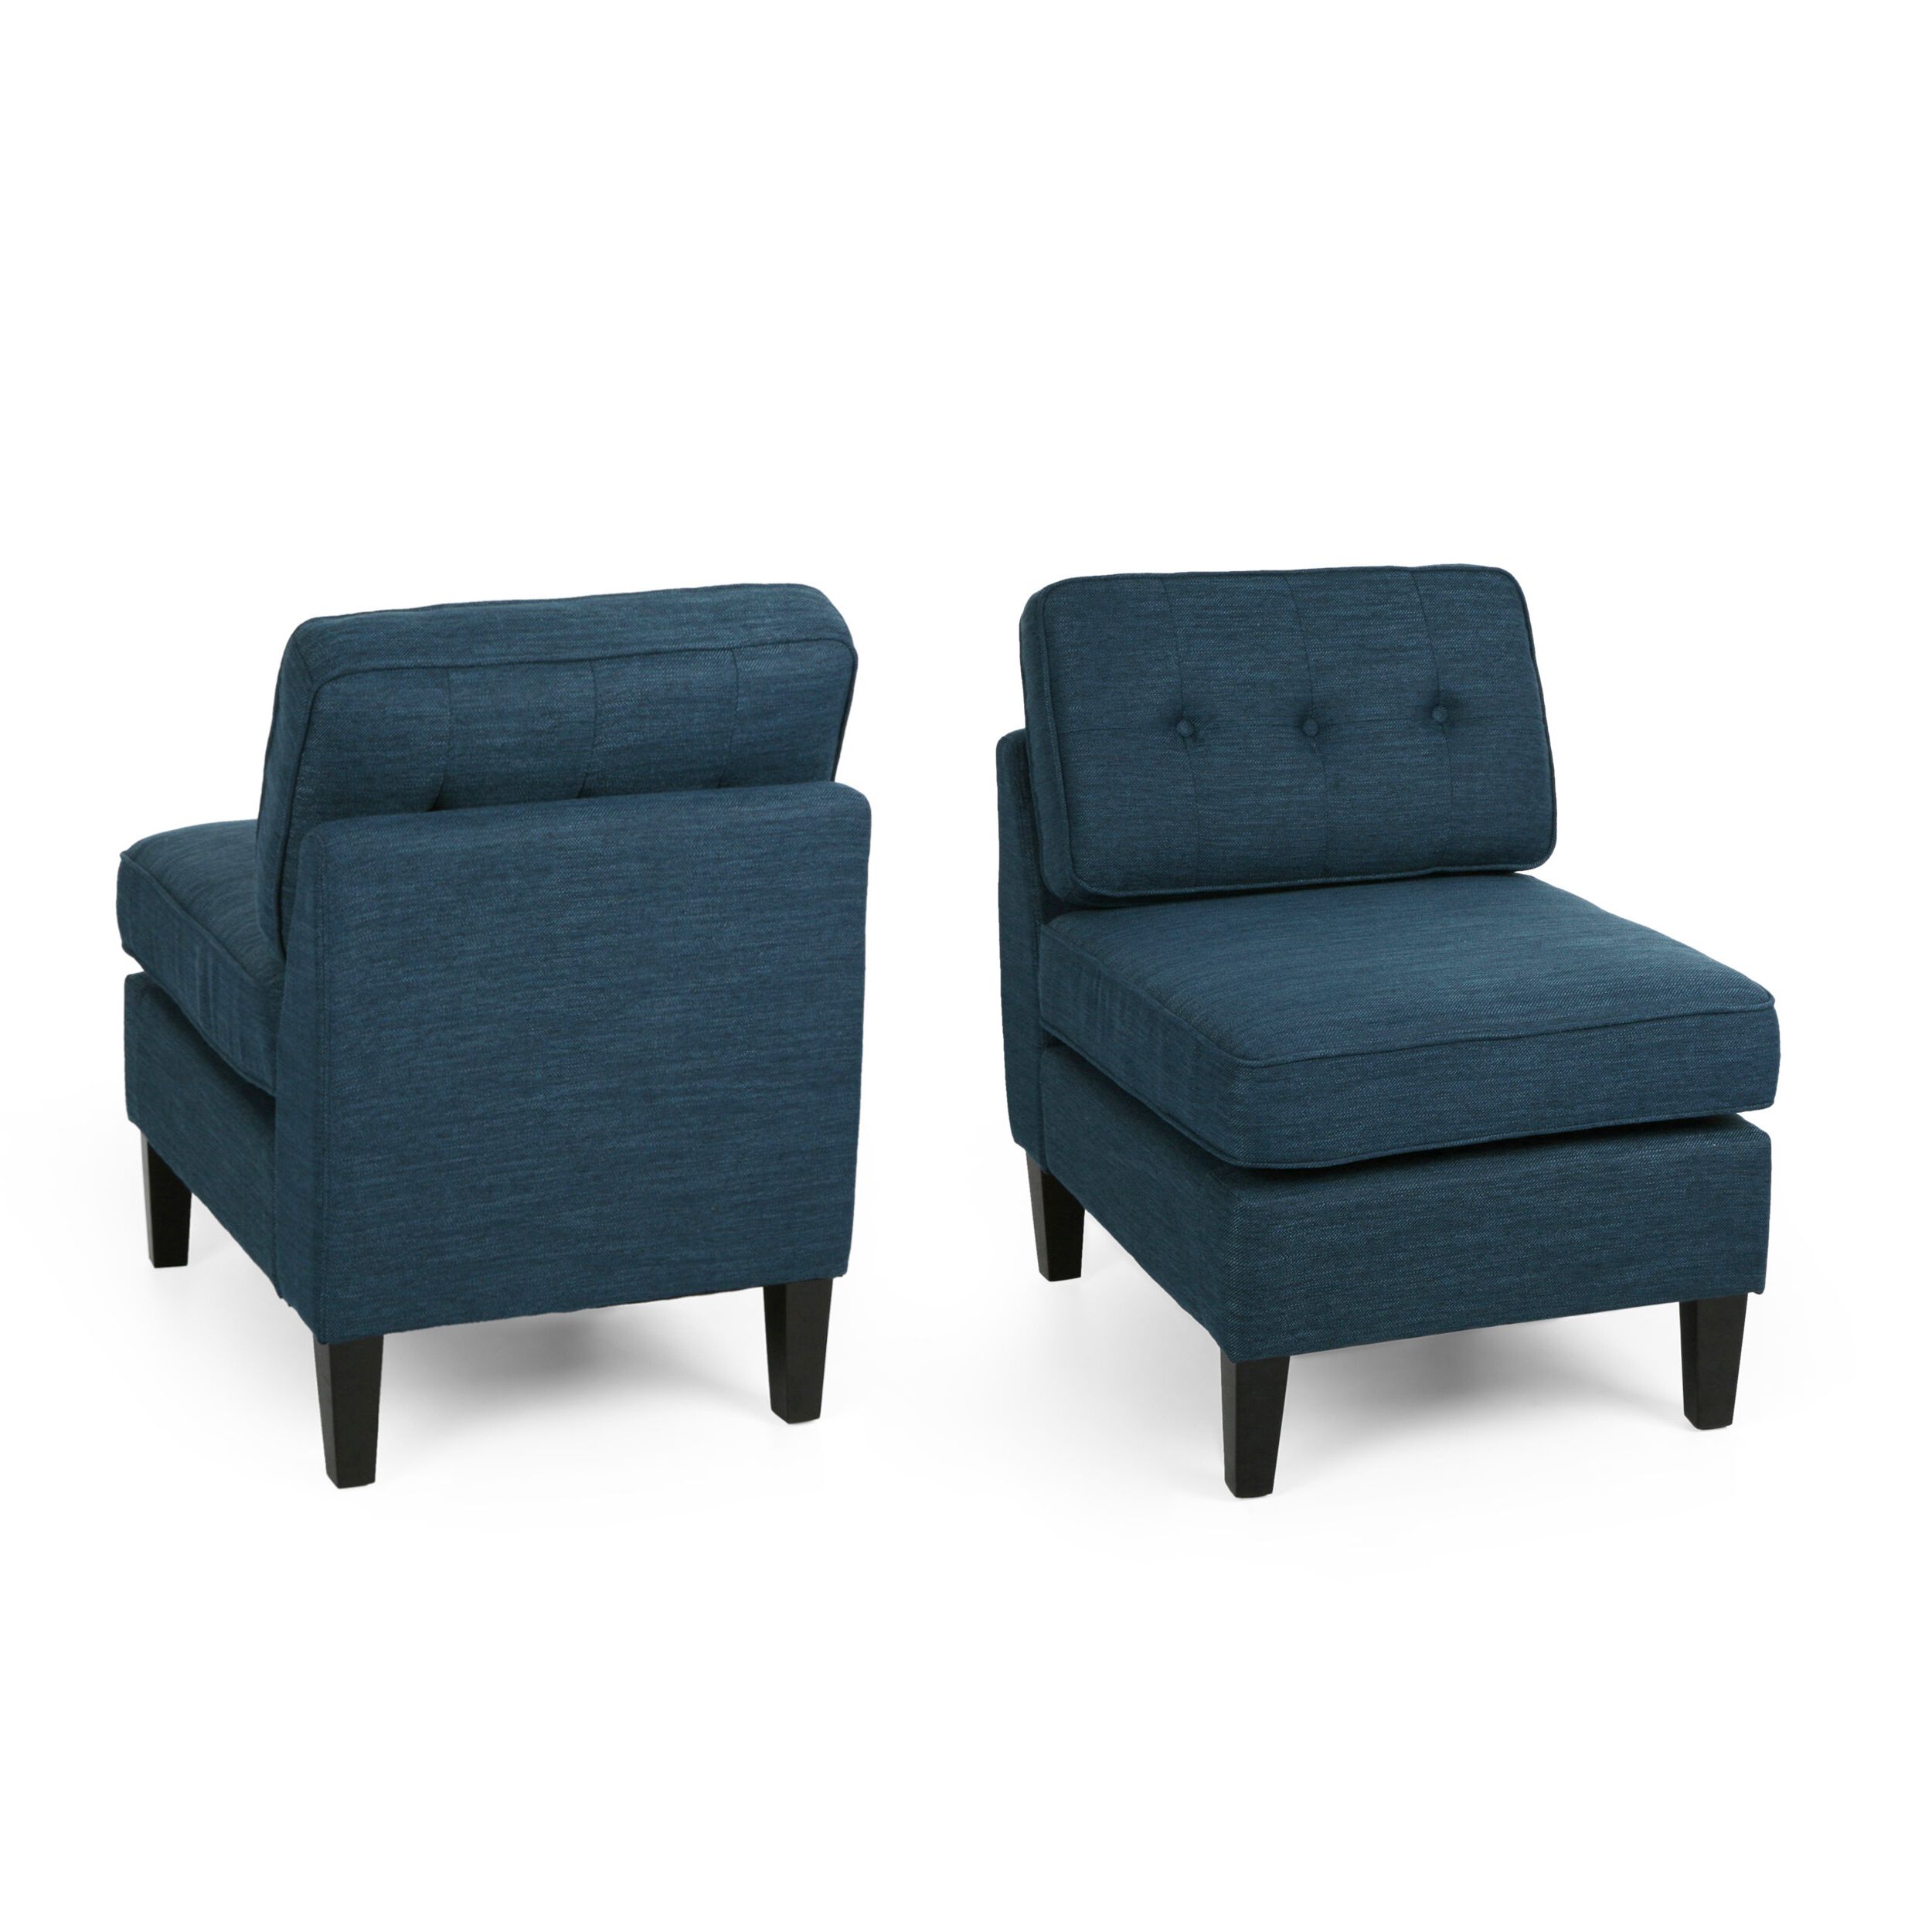 Goodspeed Slipper Chair With Regard To Most Up To Date Goodspeed Slipper Chairs (set Of 2) (View 1 of 20)